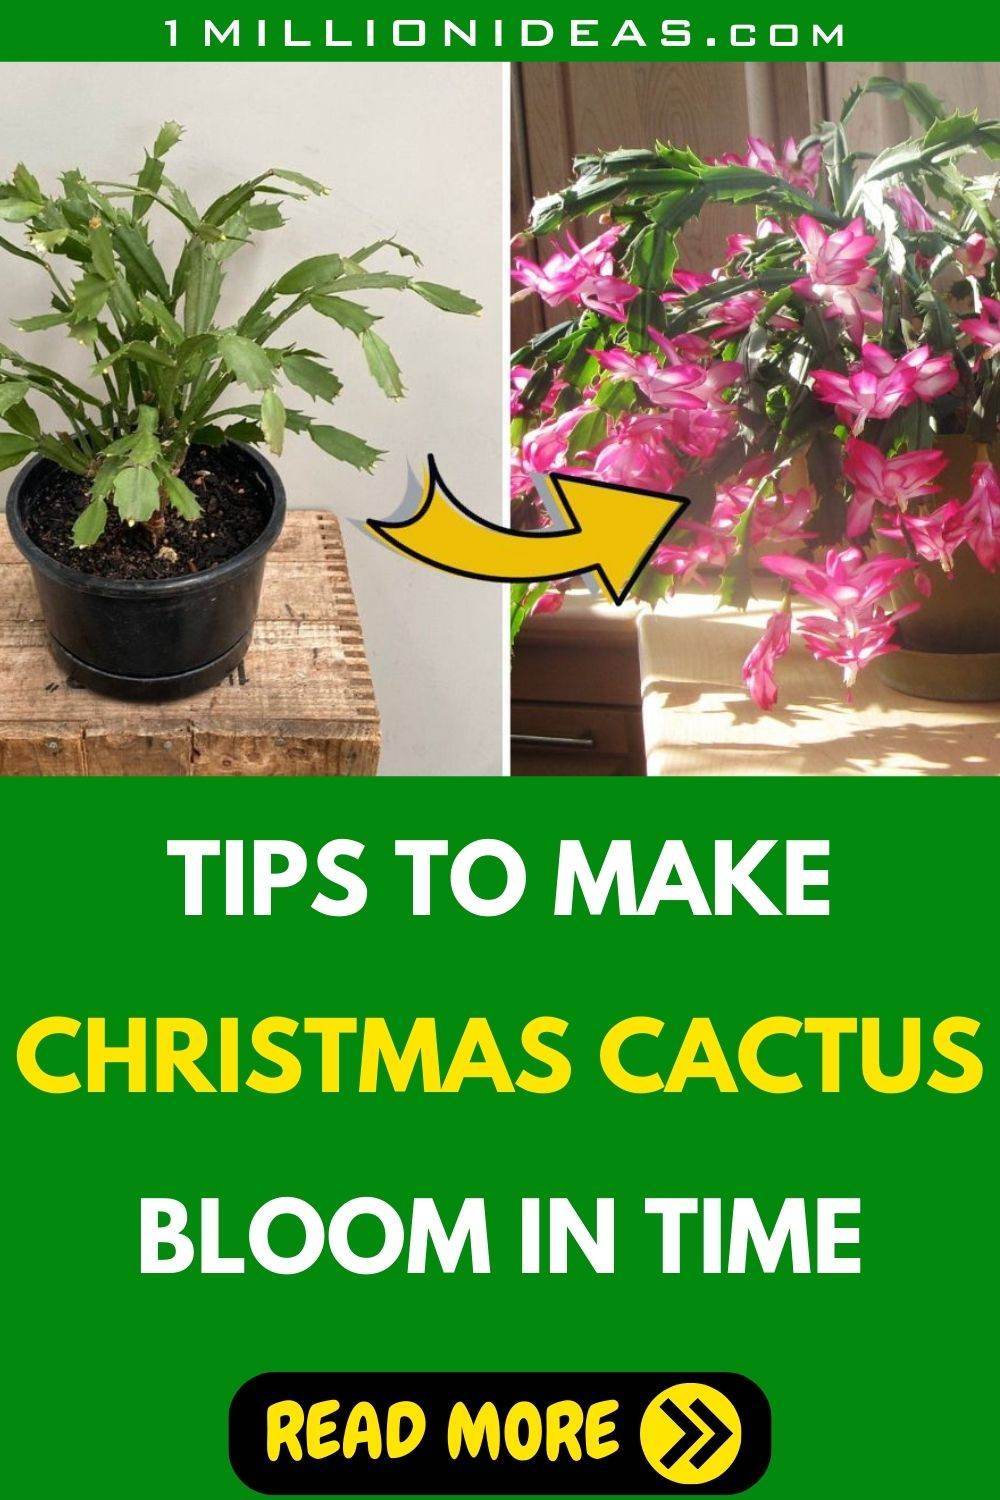 Tips To Make Christmas Cactus Bloom In Time For The Holidays - 83